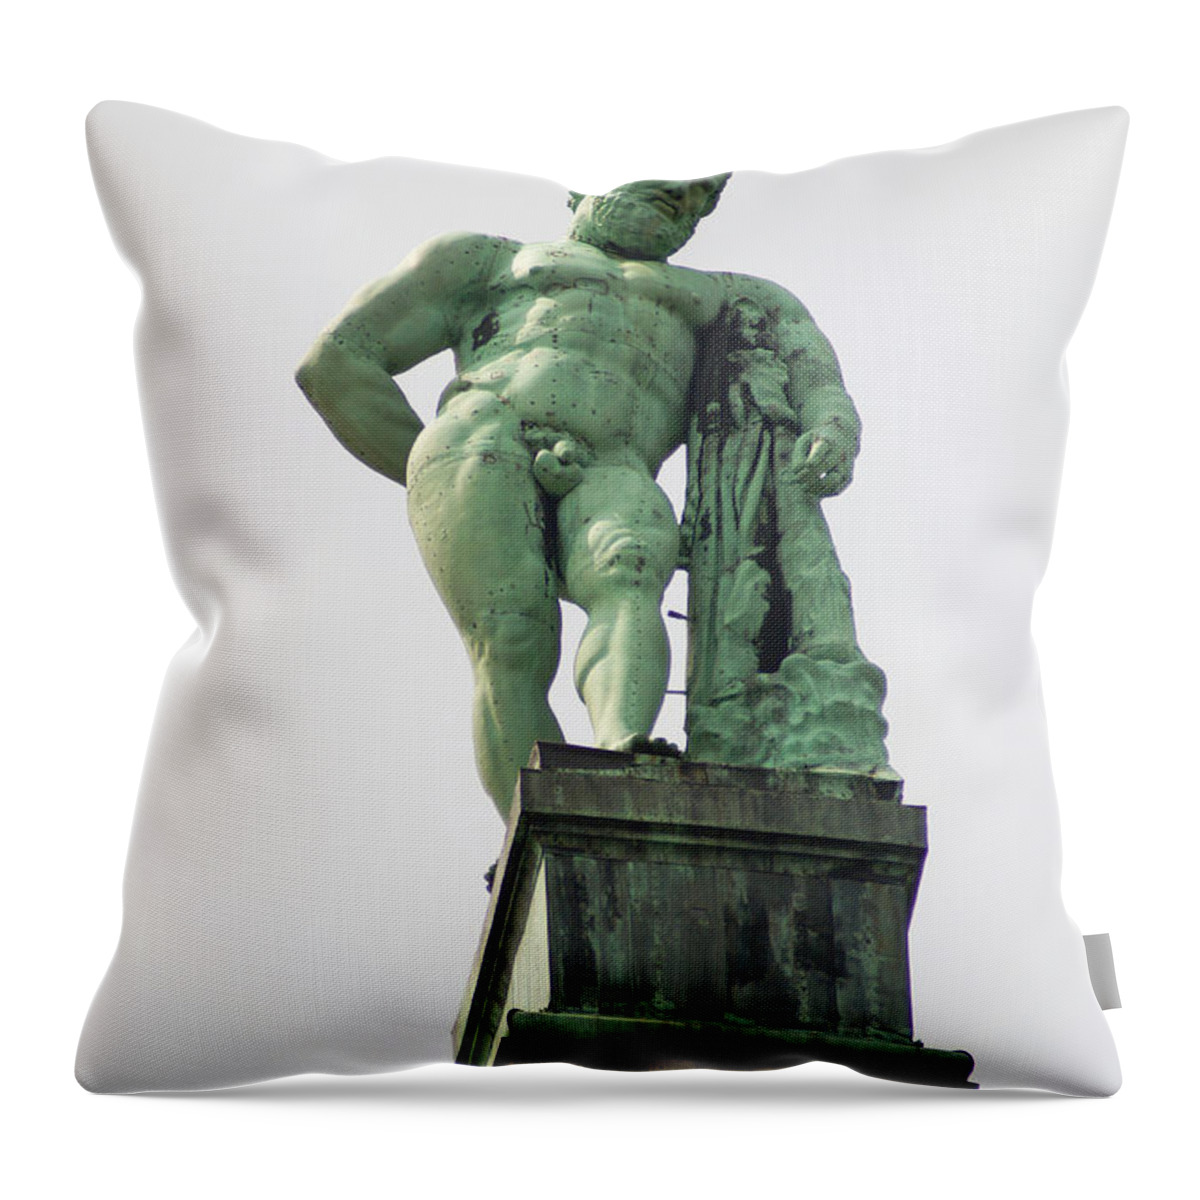 Germany Throw Pillow featuring the photograph Hercules in Kassel by Rudi Prott